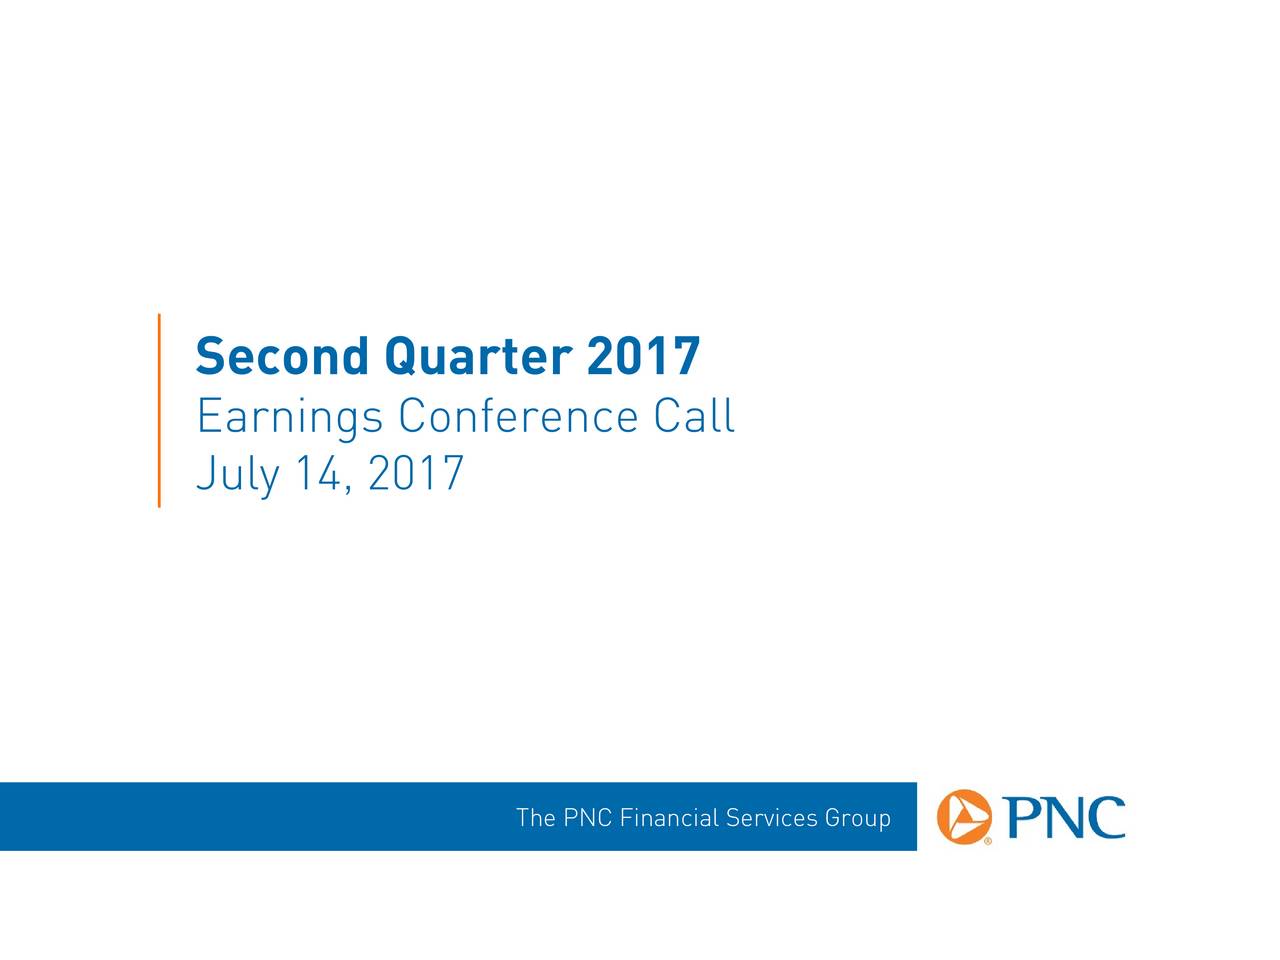 Earnings Conference Call July 14, 2017 The PNC Financial Services Group